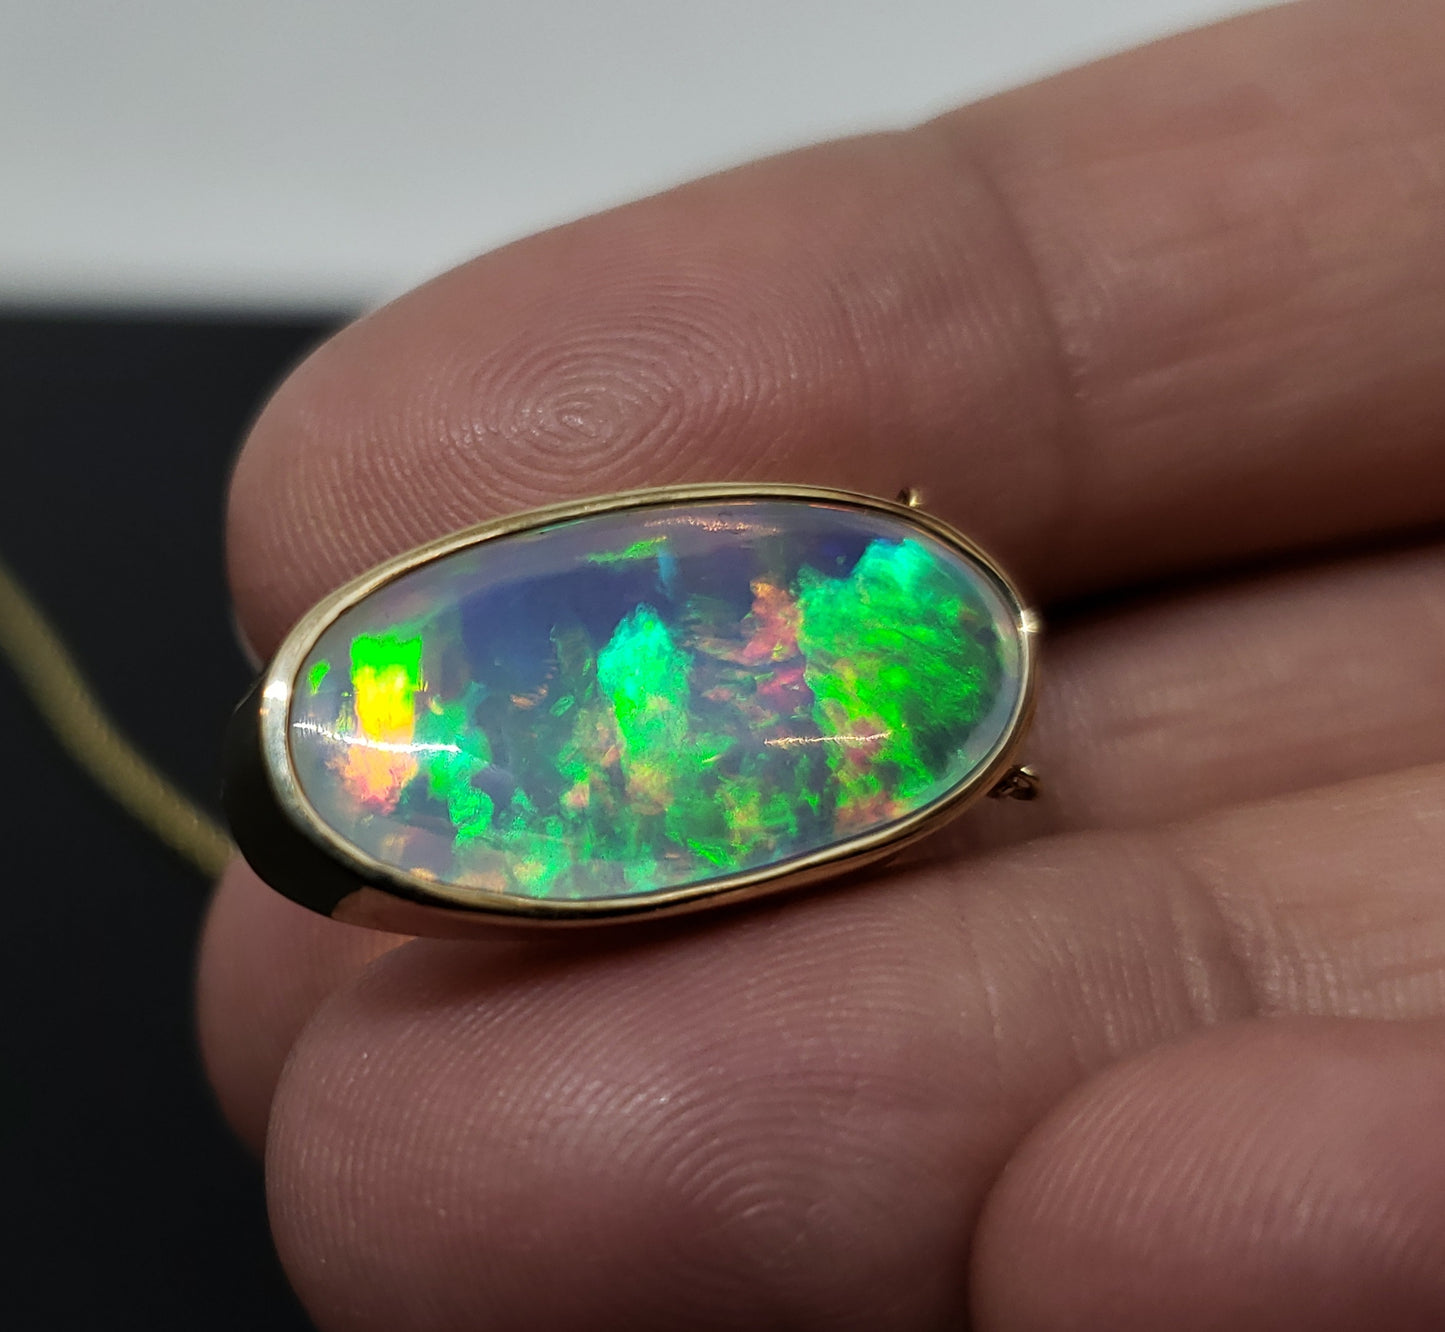 Natural Blue Green Opal Pendant 14k Yellow Gold Split Chain Necklace #145